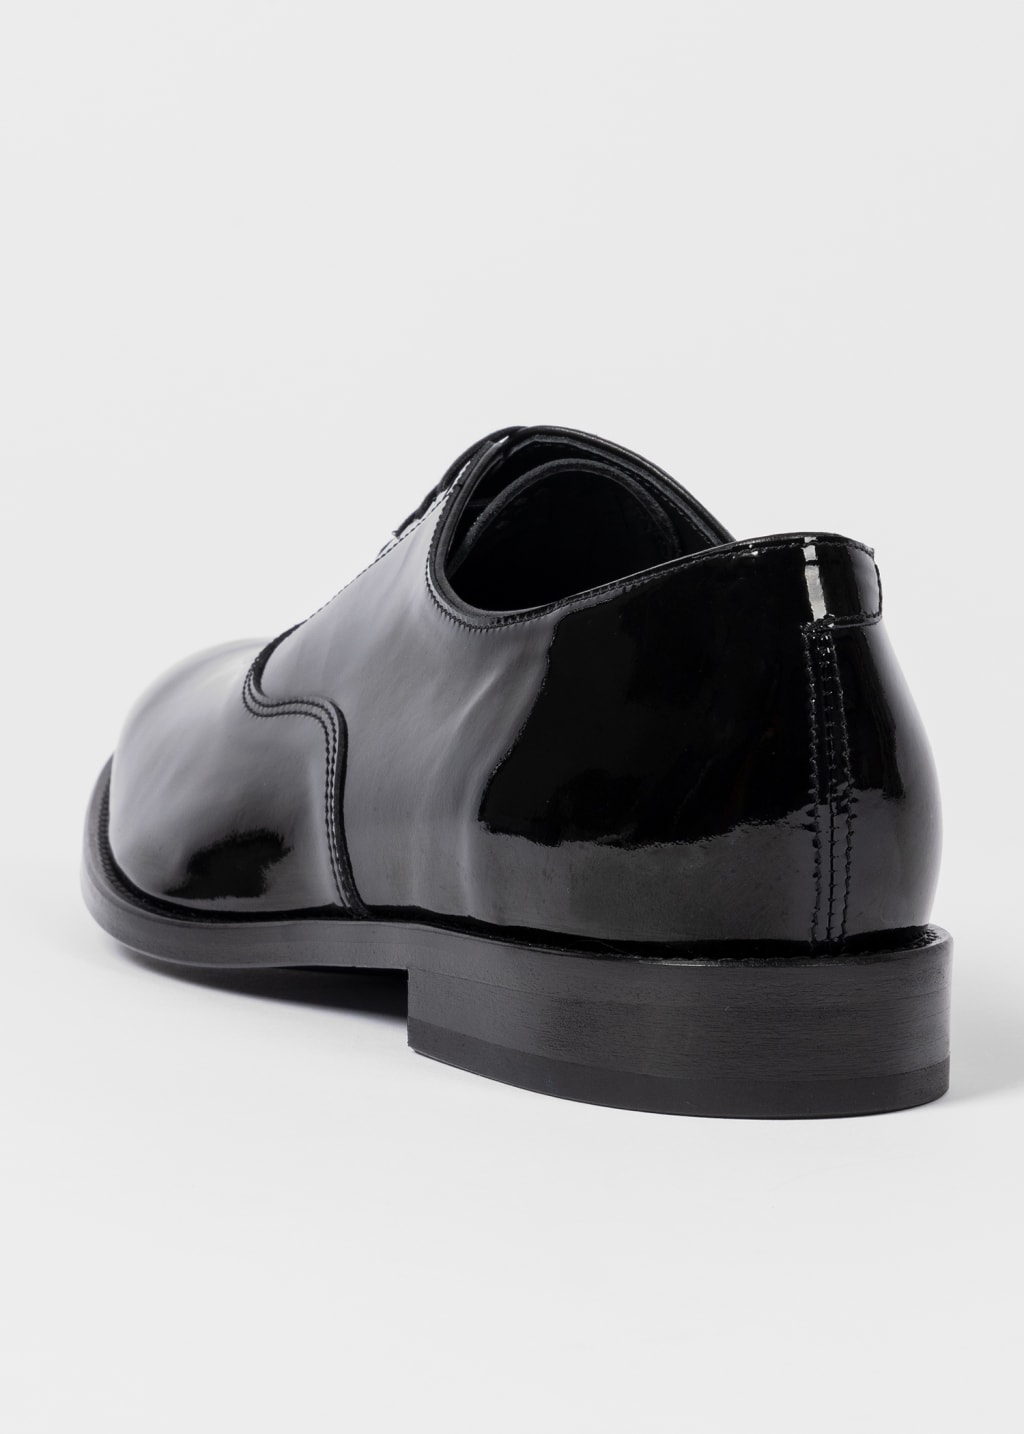 Detail View - Black Patent Leather 'Grant' Shoes Paul Smith